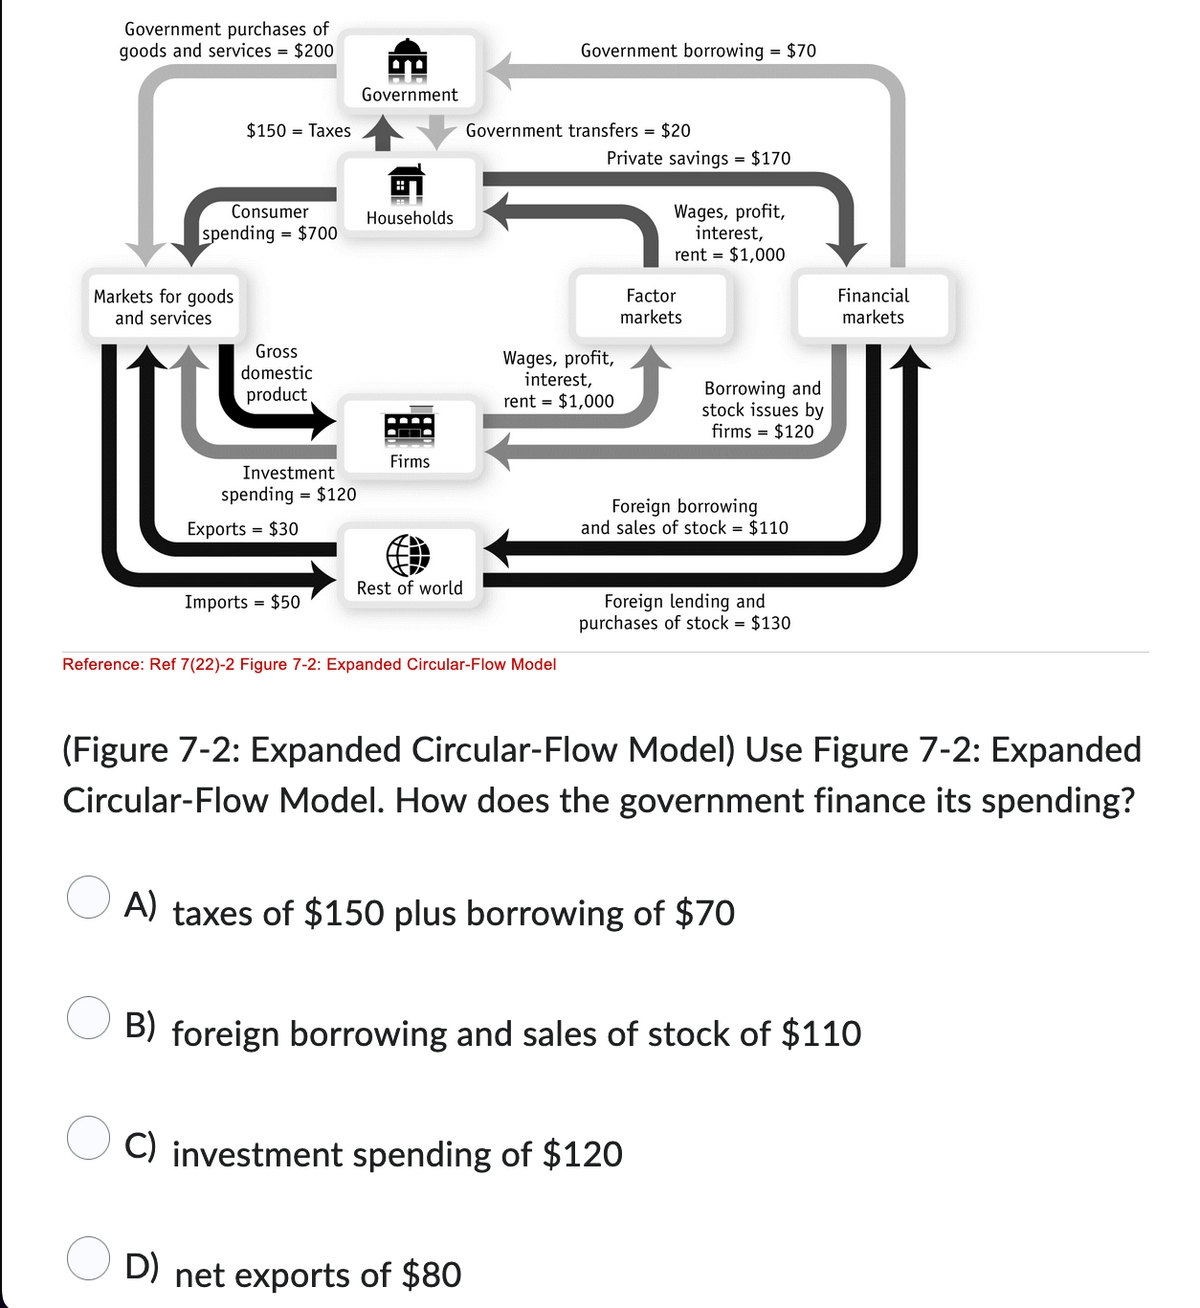 Government purchases of
goods and services = $200
$150 = Taxes
Consumer
spending = $700
Markets for goods
and services
Gross
domestic
product
Investment
spending = $120
Exports = $30
Imports = $50
Government
|
Households
Firms
Rest of world
Government borrowing = $70
Government transfers = $20
Reference: Ref 7(22)-2 Figure 7-2: Expanded Circular-Flow Model
Private savings = $170
Wages, profit,
interest,
rent = $1,000
D) net exports of $80
Wages, profit,
interest,
rent = $1,000
Factor
markets
Borrowing and
stock issues by
firms = $120
Foreign borrowing
and sales of stock = $110
Foreign lending and
purchases of stock = $130
C) investment spending of $120
(Figure 7-2: Expanded Circular-Flow Model) Use Figure 7-2: Expanded
Circular-Flow Model. How does the government finance its spending?
A) taxes of $150 plus borrowing of $70
Financial
markets
B) foreign borrowing and sales of stock of $110